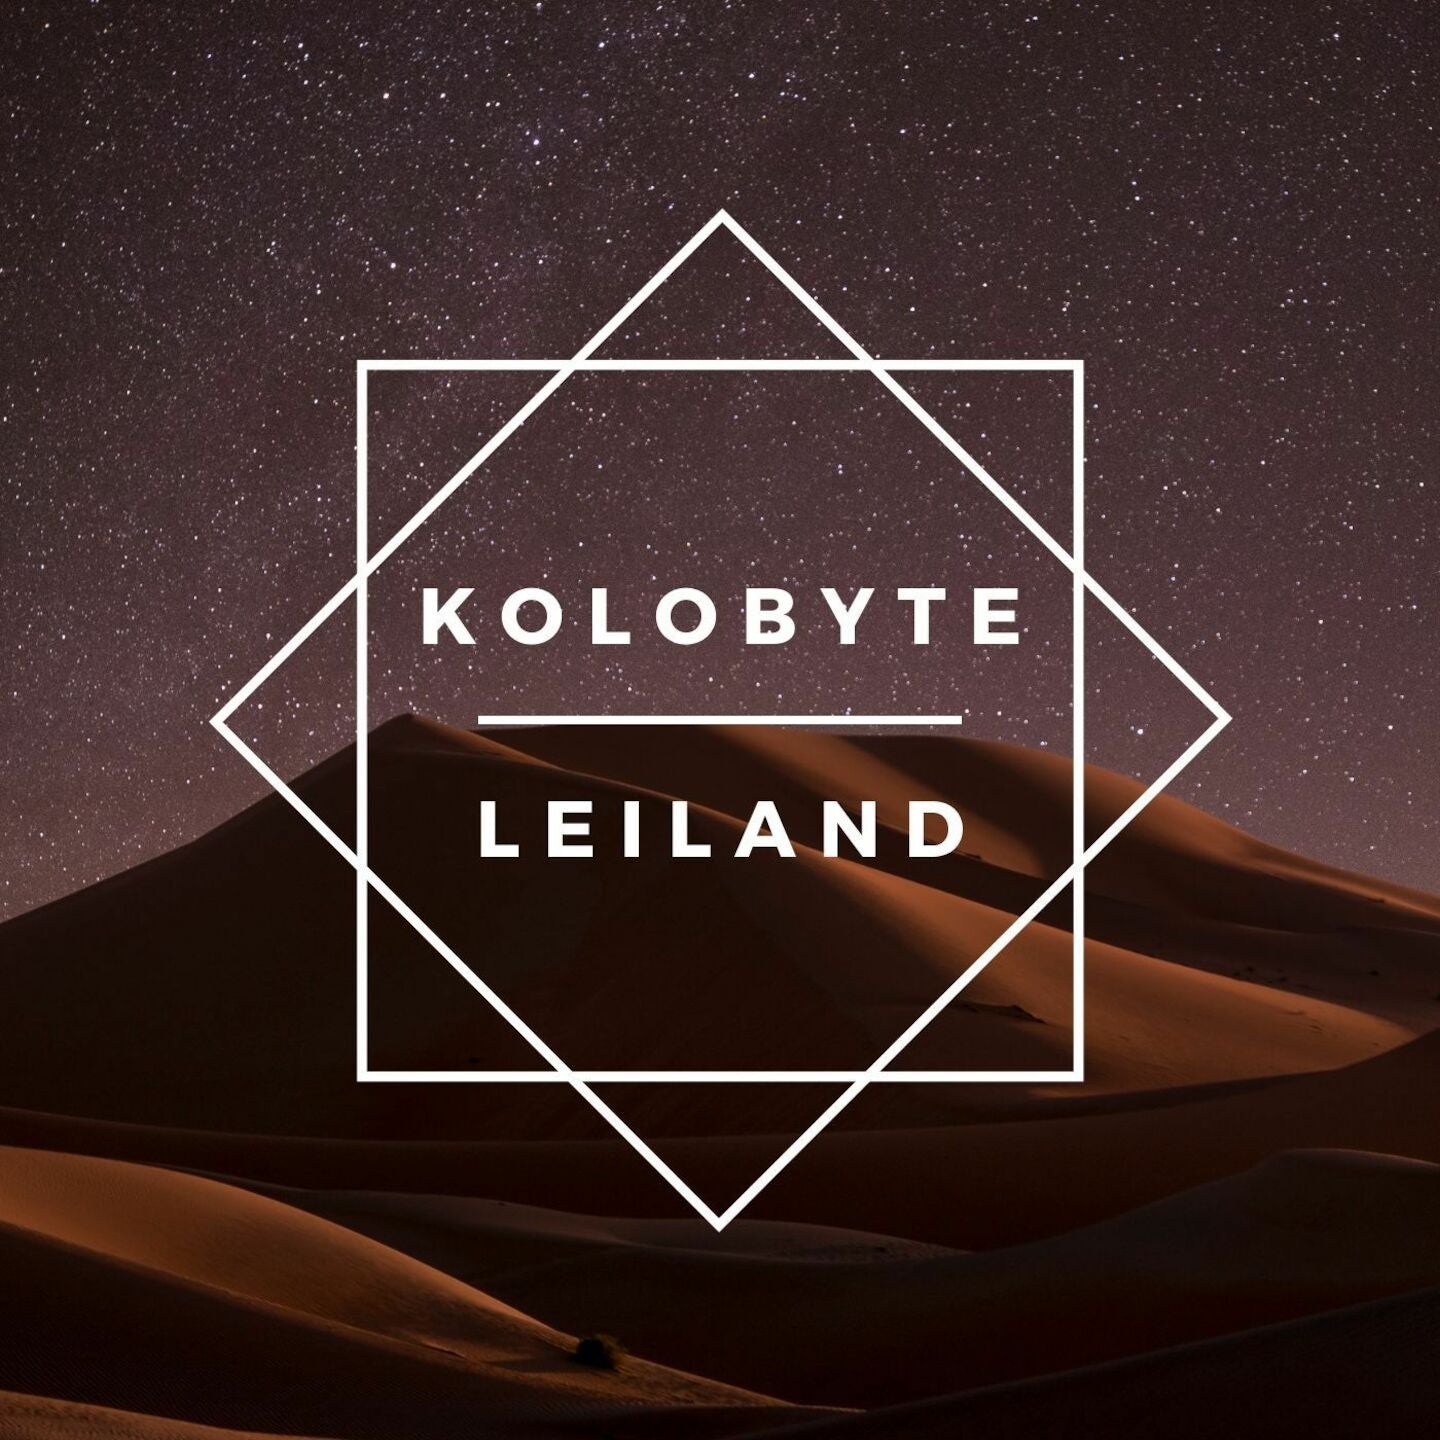 Many Are Called (Kolobyte Peculiar Mix)